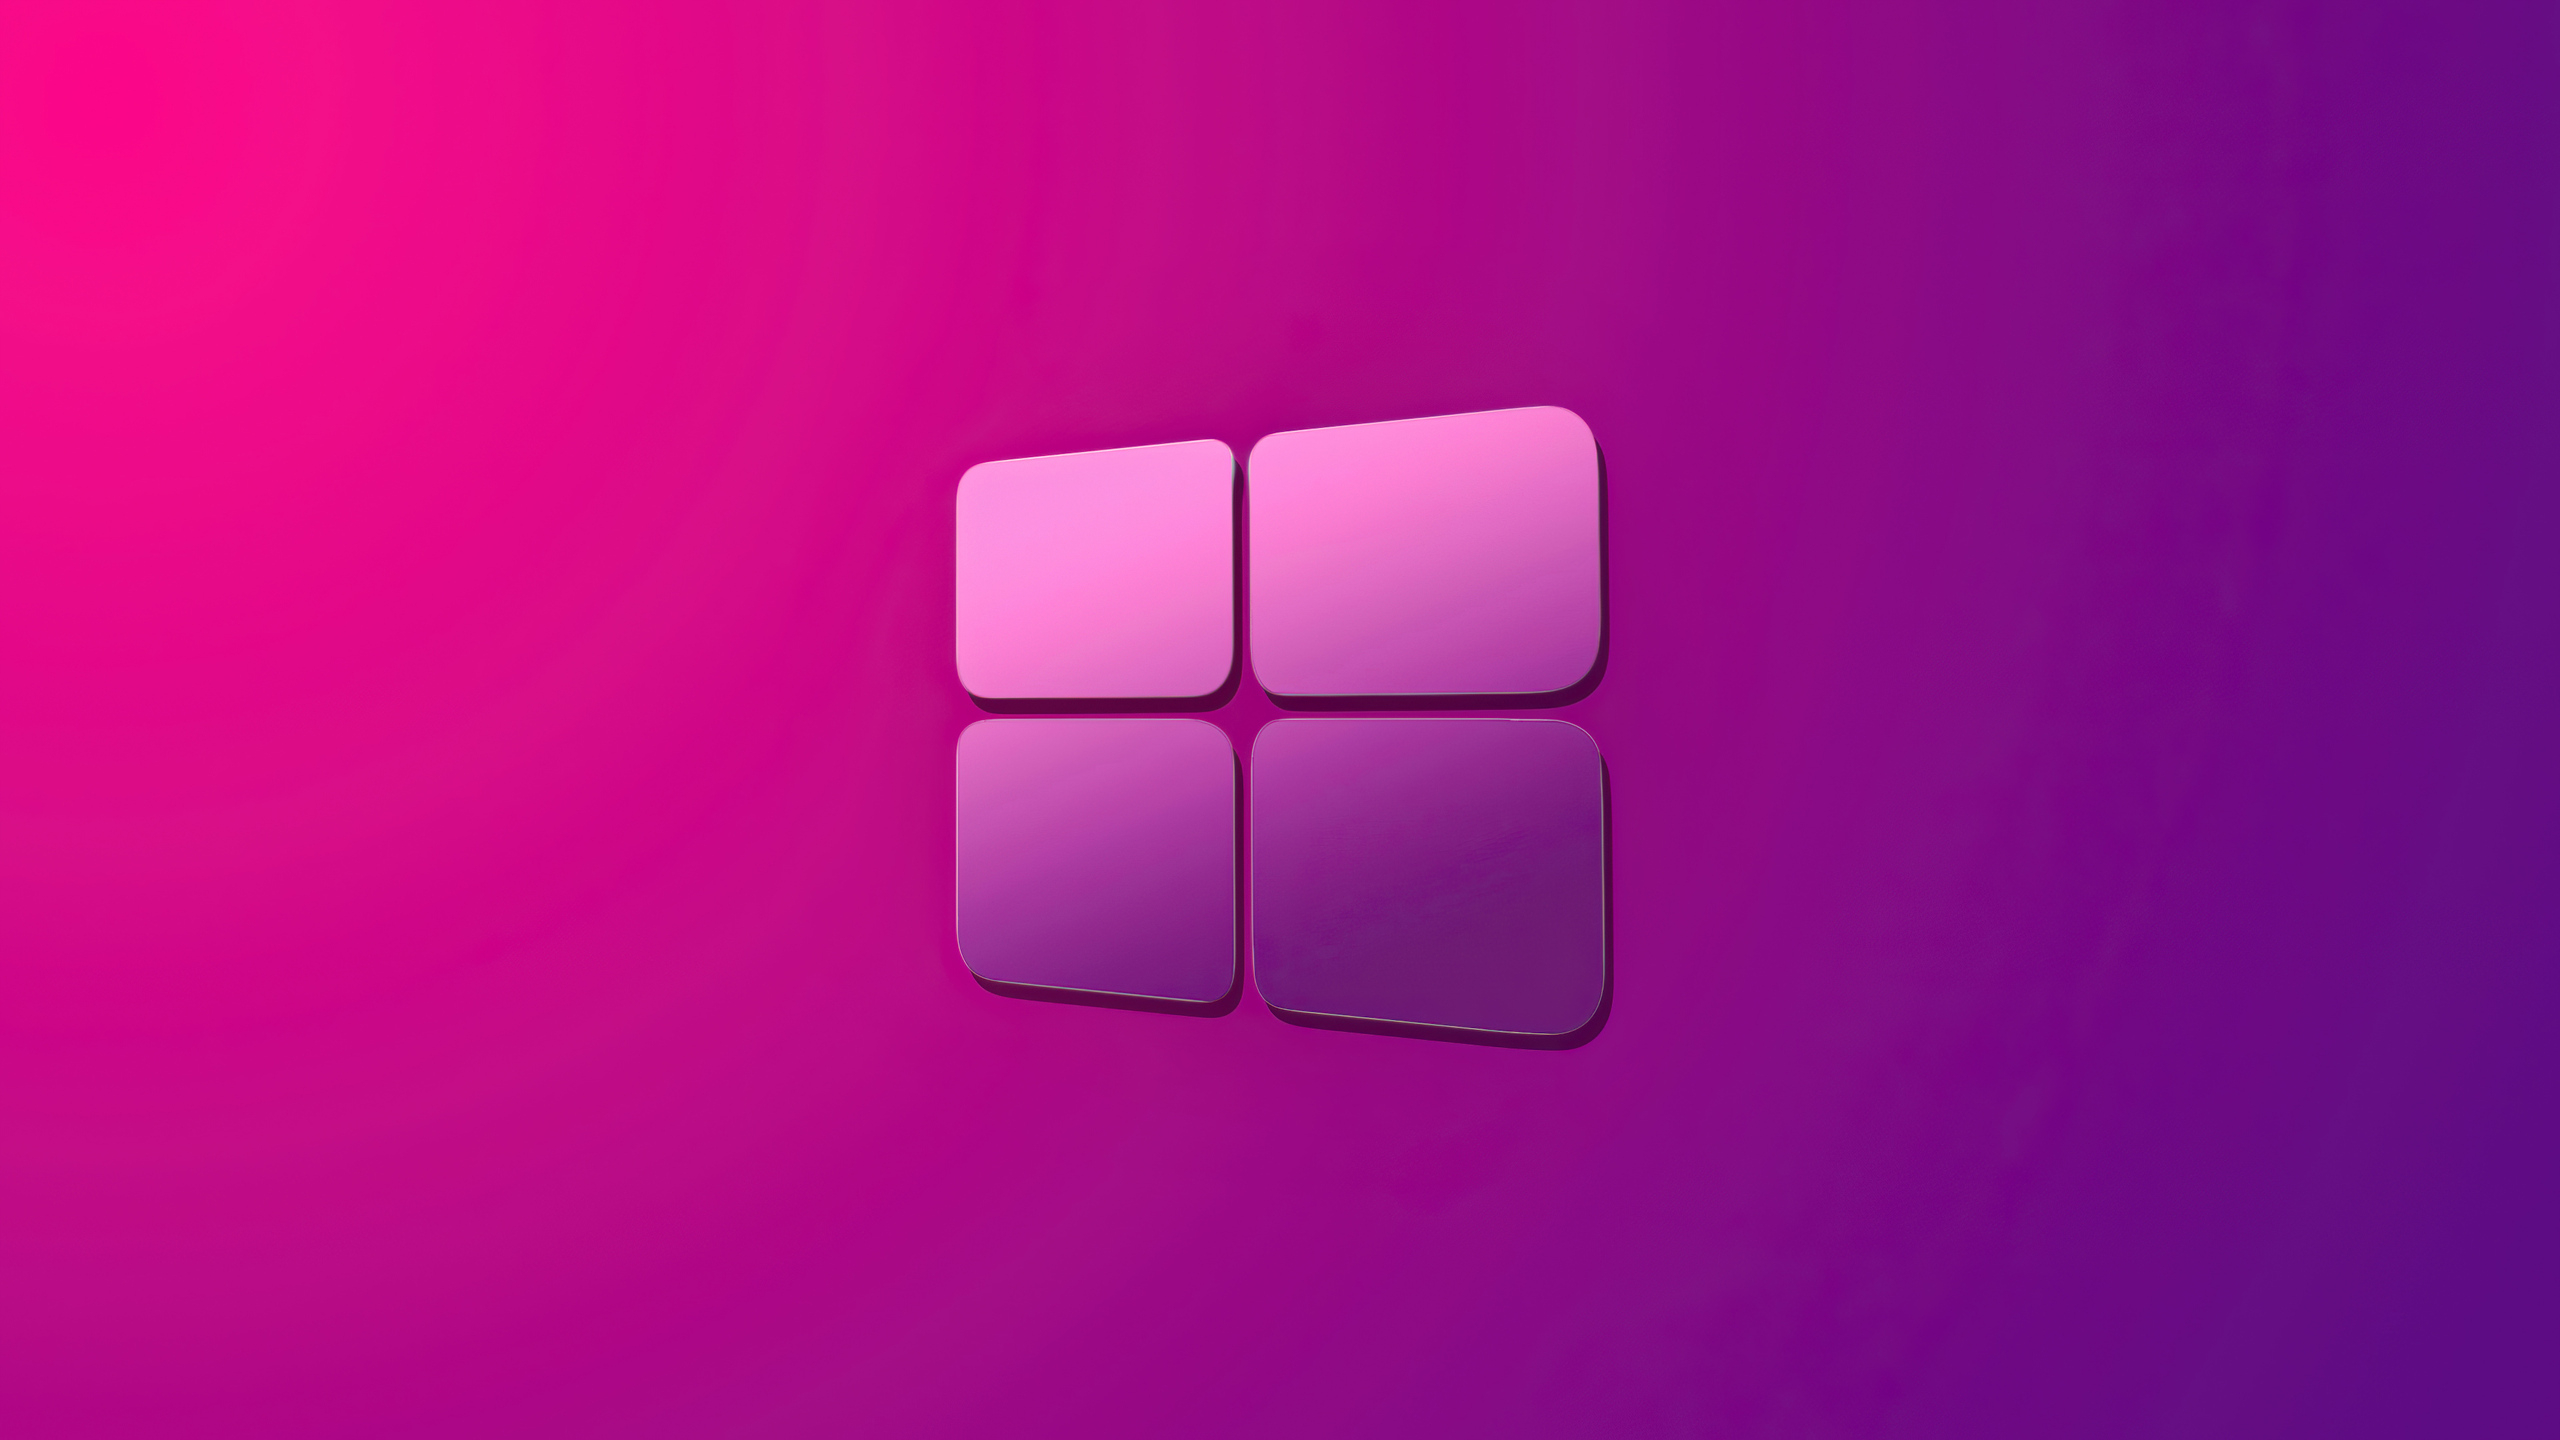 2560x1440 Windows 10 Pink Purple Gradient Logo 4k 1440P Resolution HD 4k Wallpapers, Images, Backgrounds, Photos and Pictures